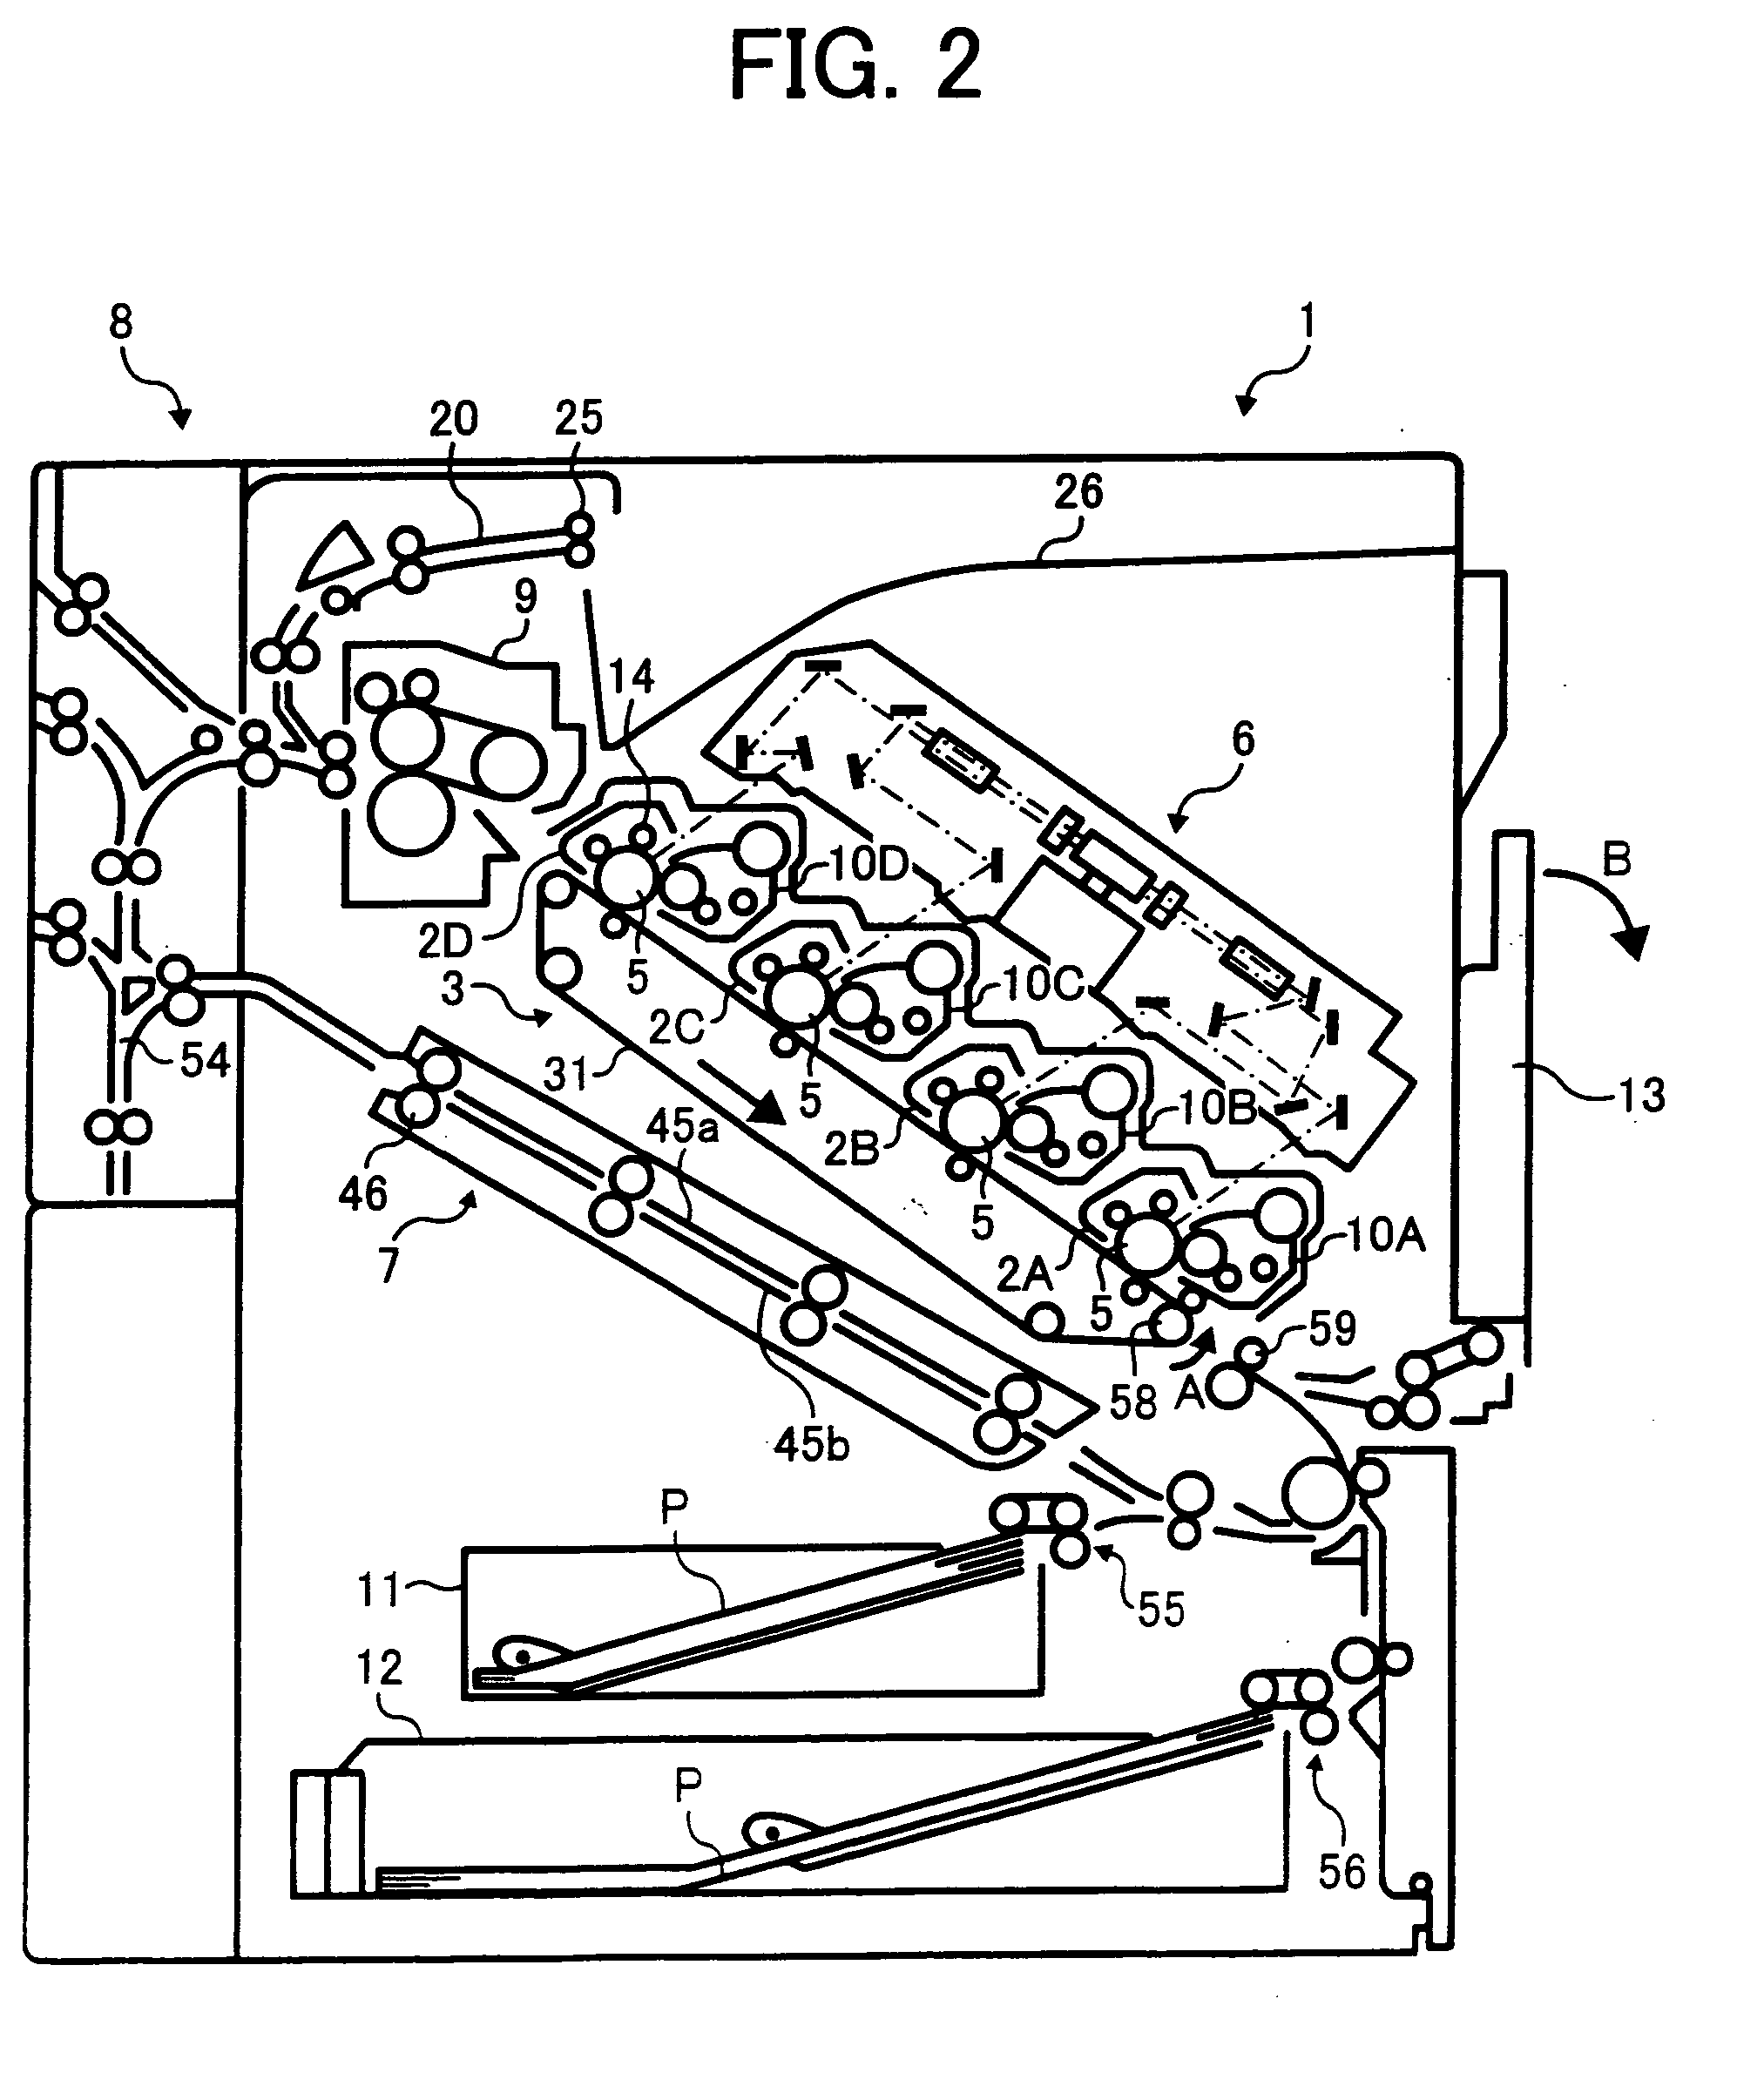 Lubricant supply device, image forming apparatus, and pressing device